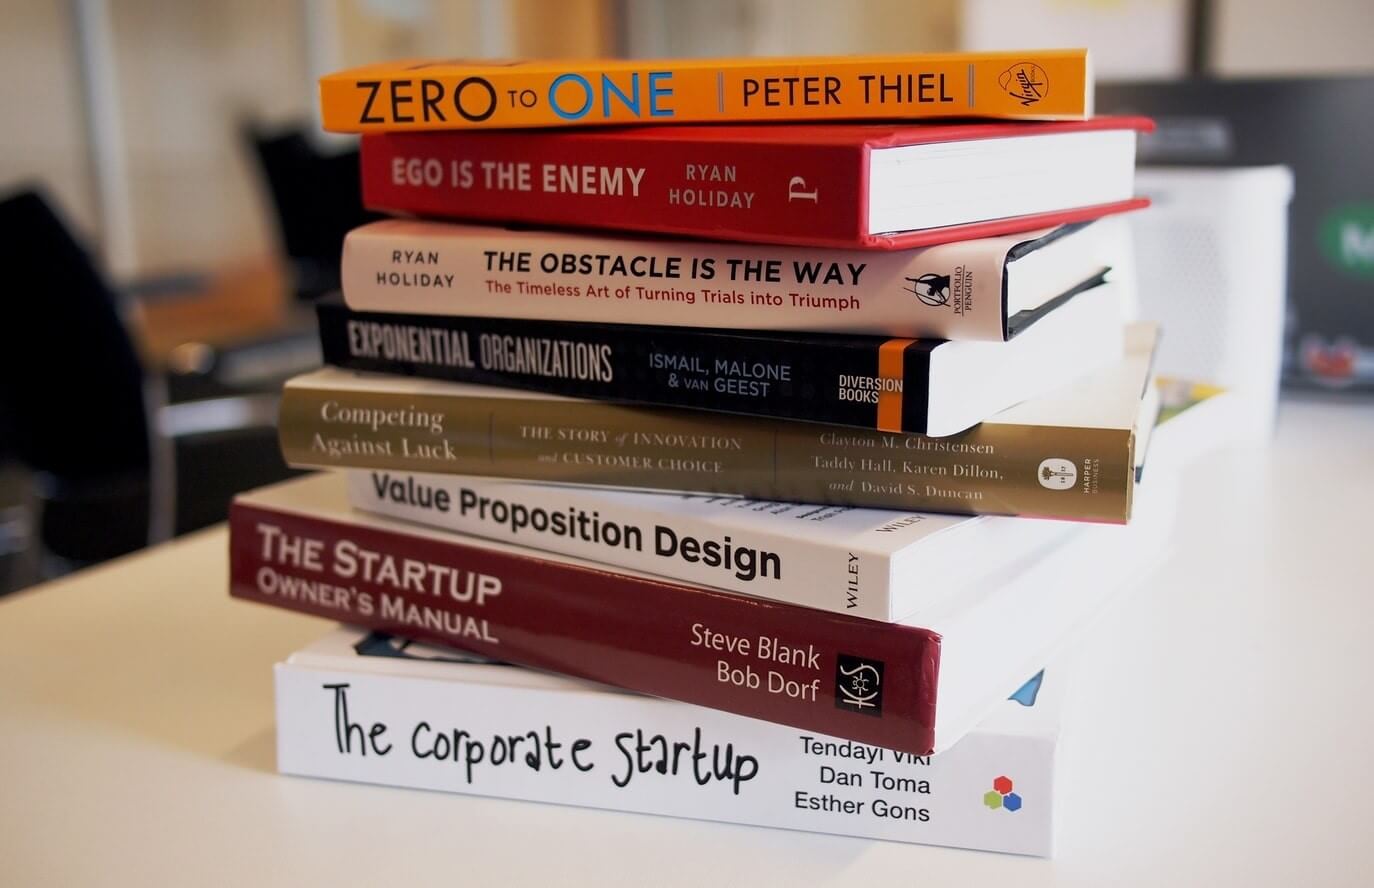 The Core component of lean startup methodology